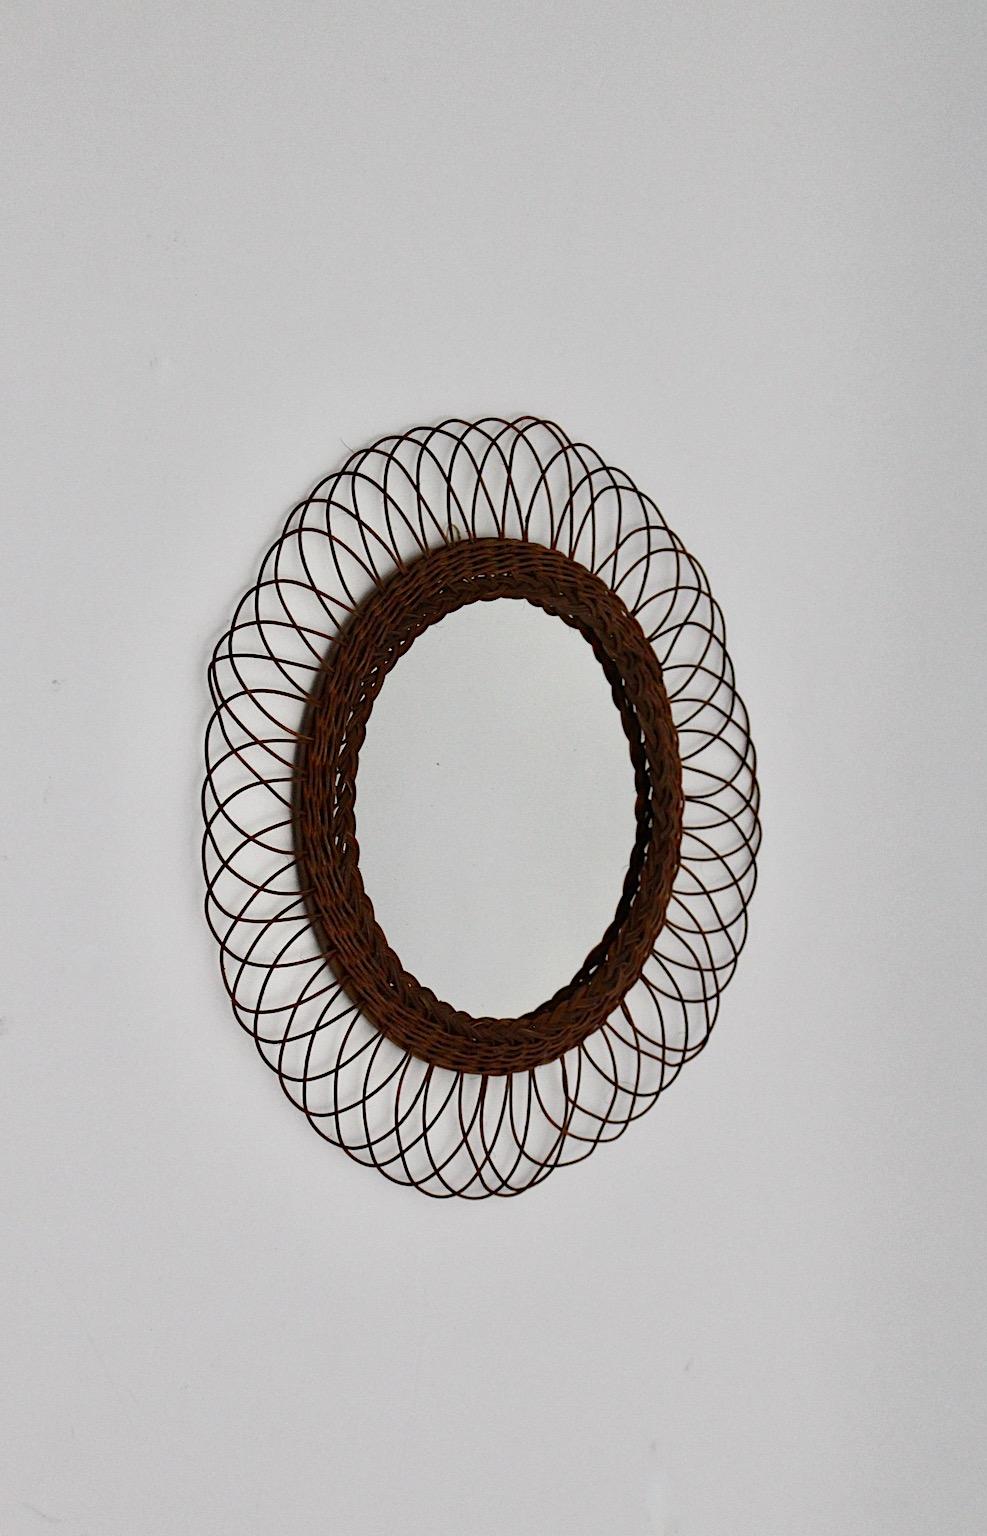 Mid-Century Modern vintage brown wall mirror circular like from willow, 1960s Austria.
A stunning and delicate circular like wall mirror framed with braided willow and slightly curved loops like sunbursts or blossom leaves.
This wall mirror could